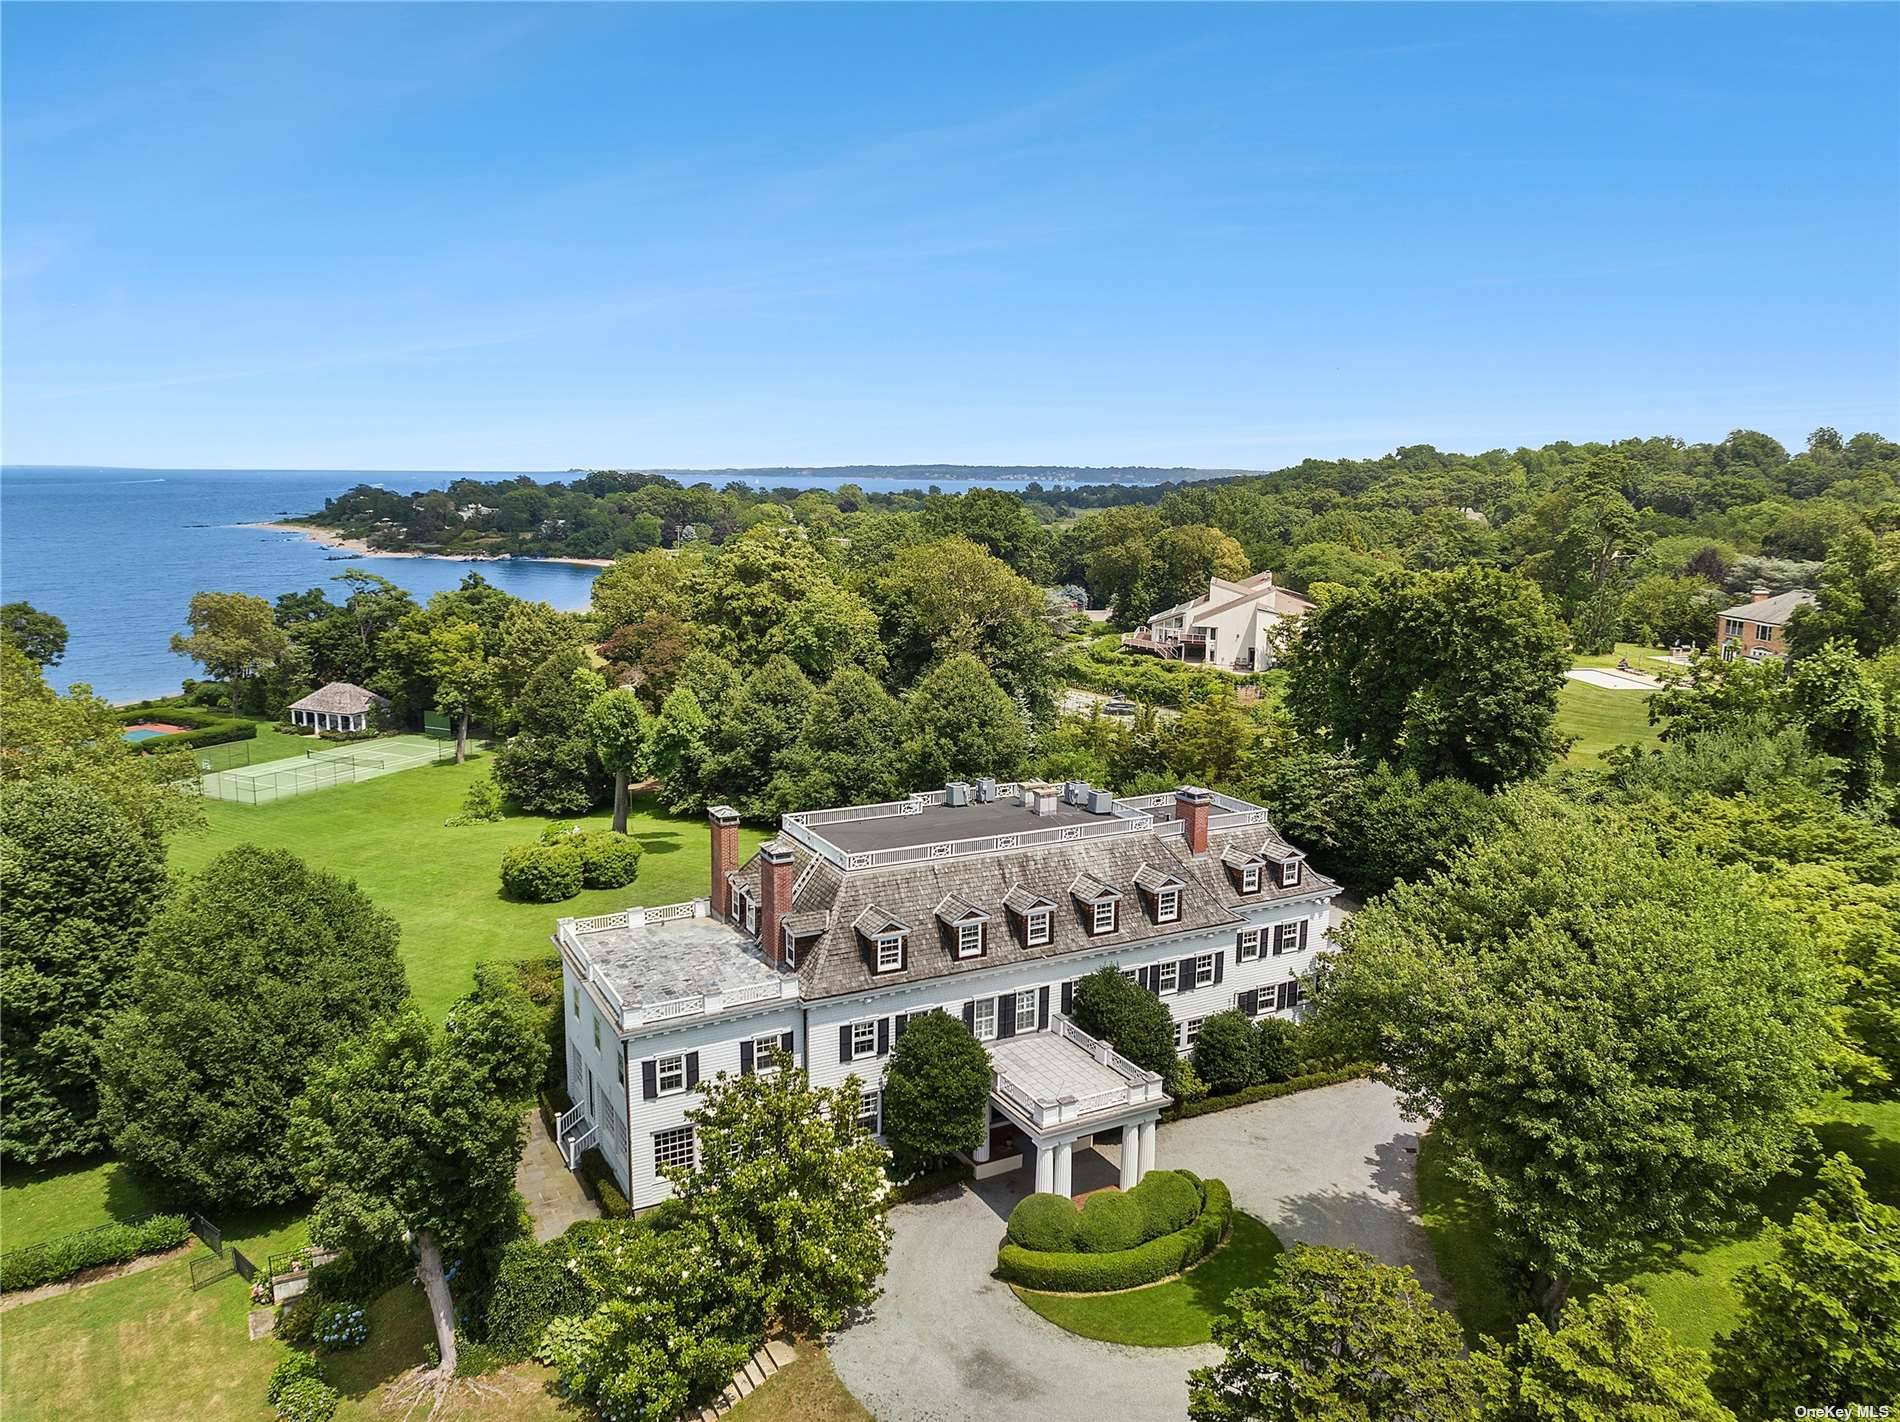 The Lindens is an enduringly gracious estate poised on 5.